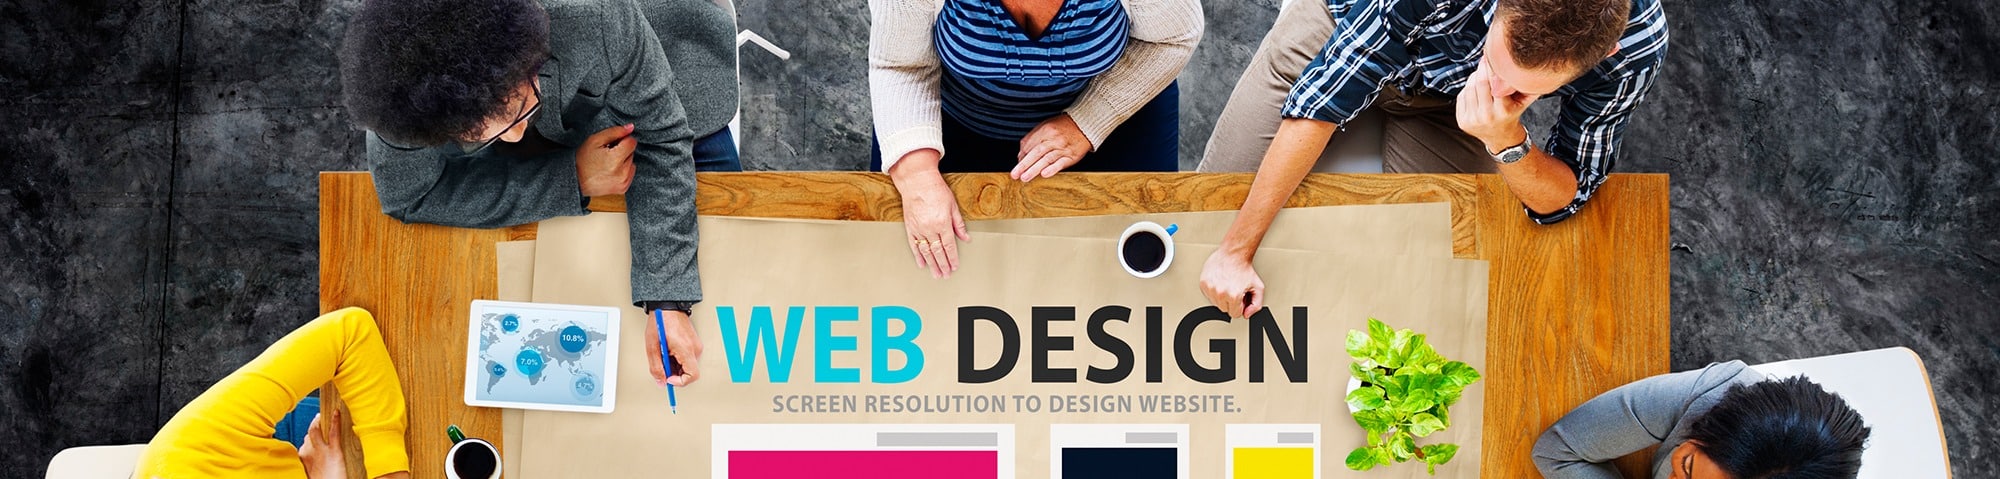 How To Build Relationships With Web Design Clients